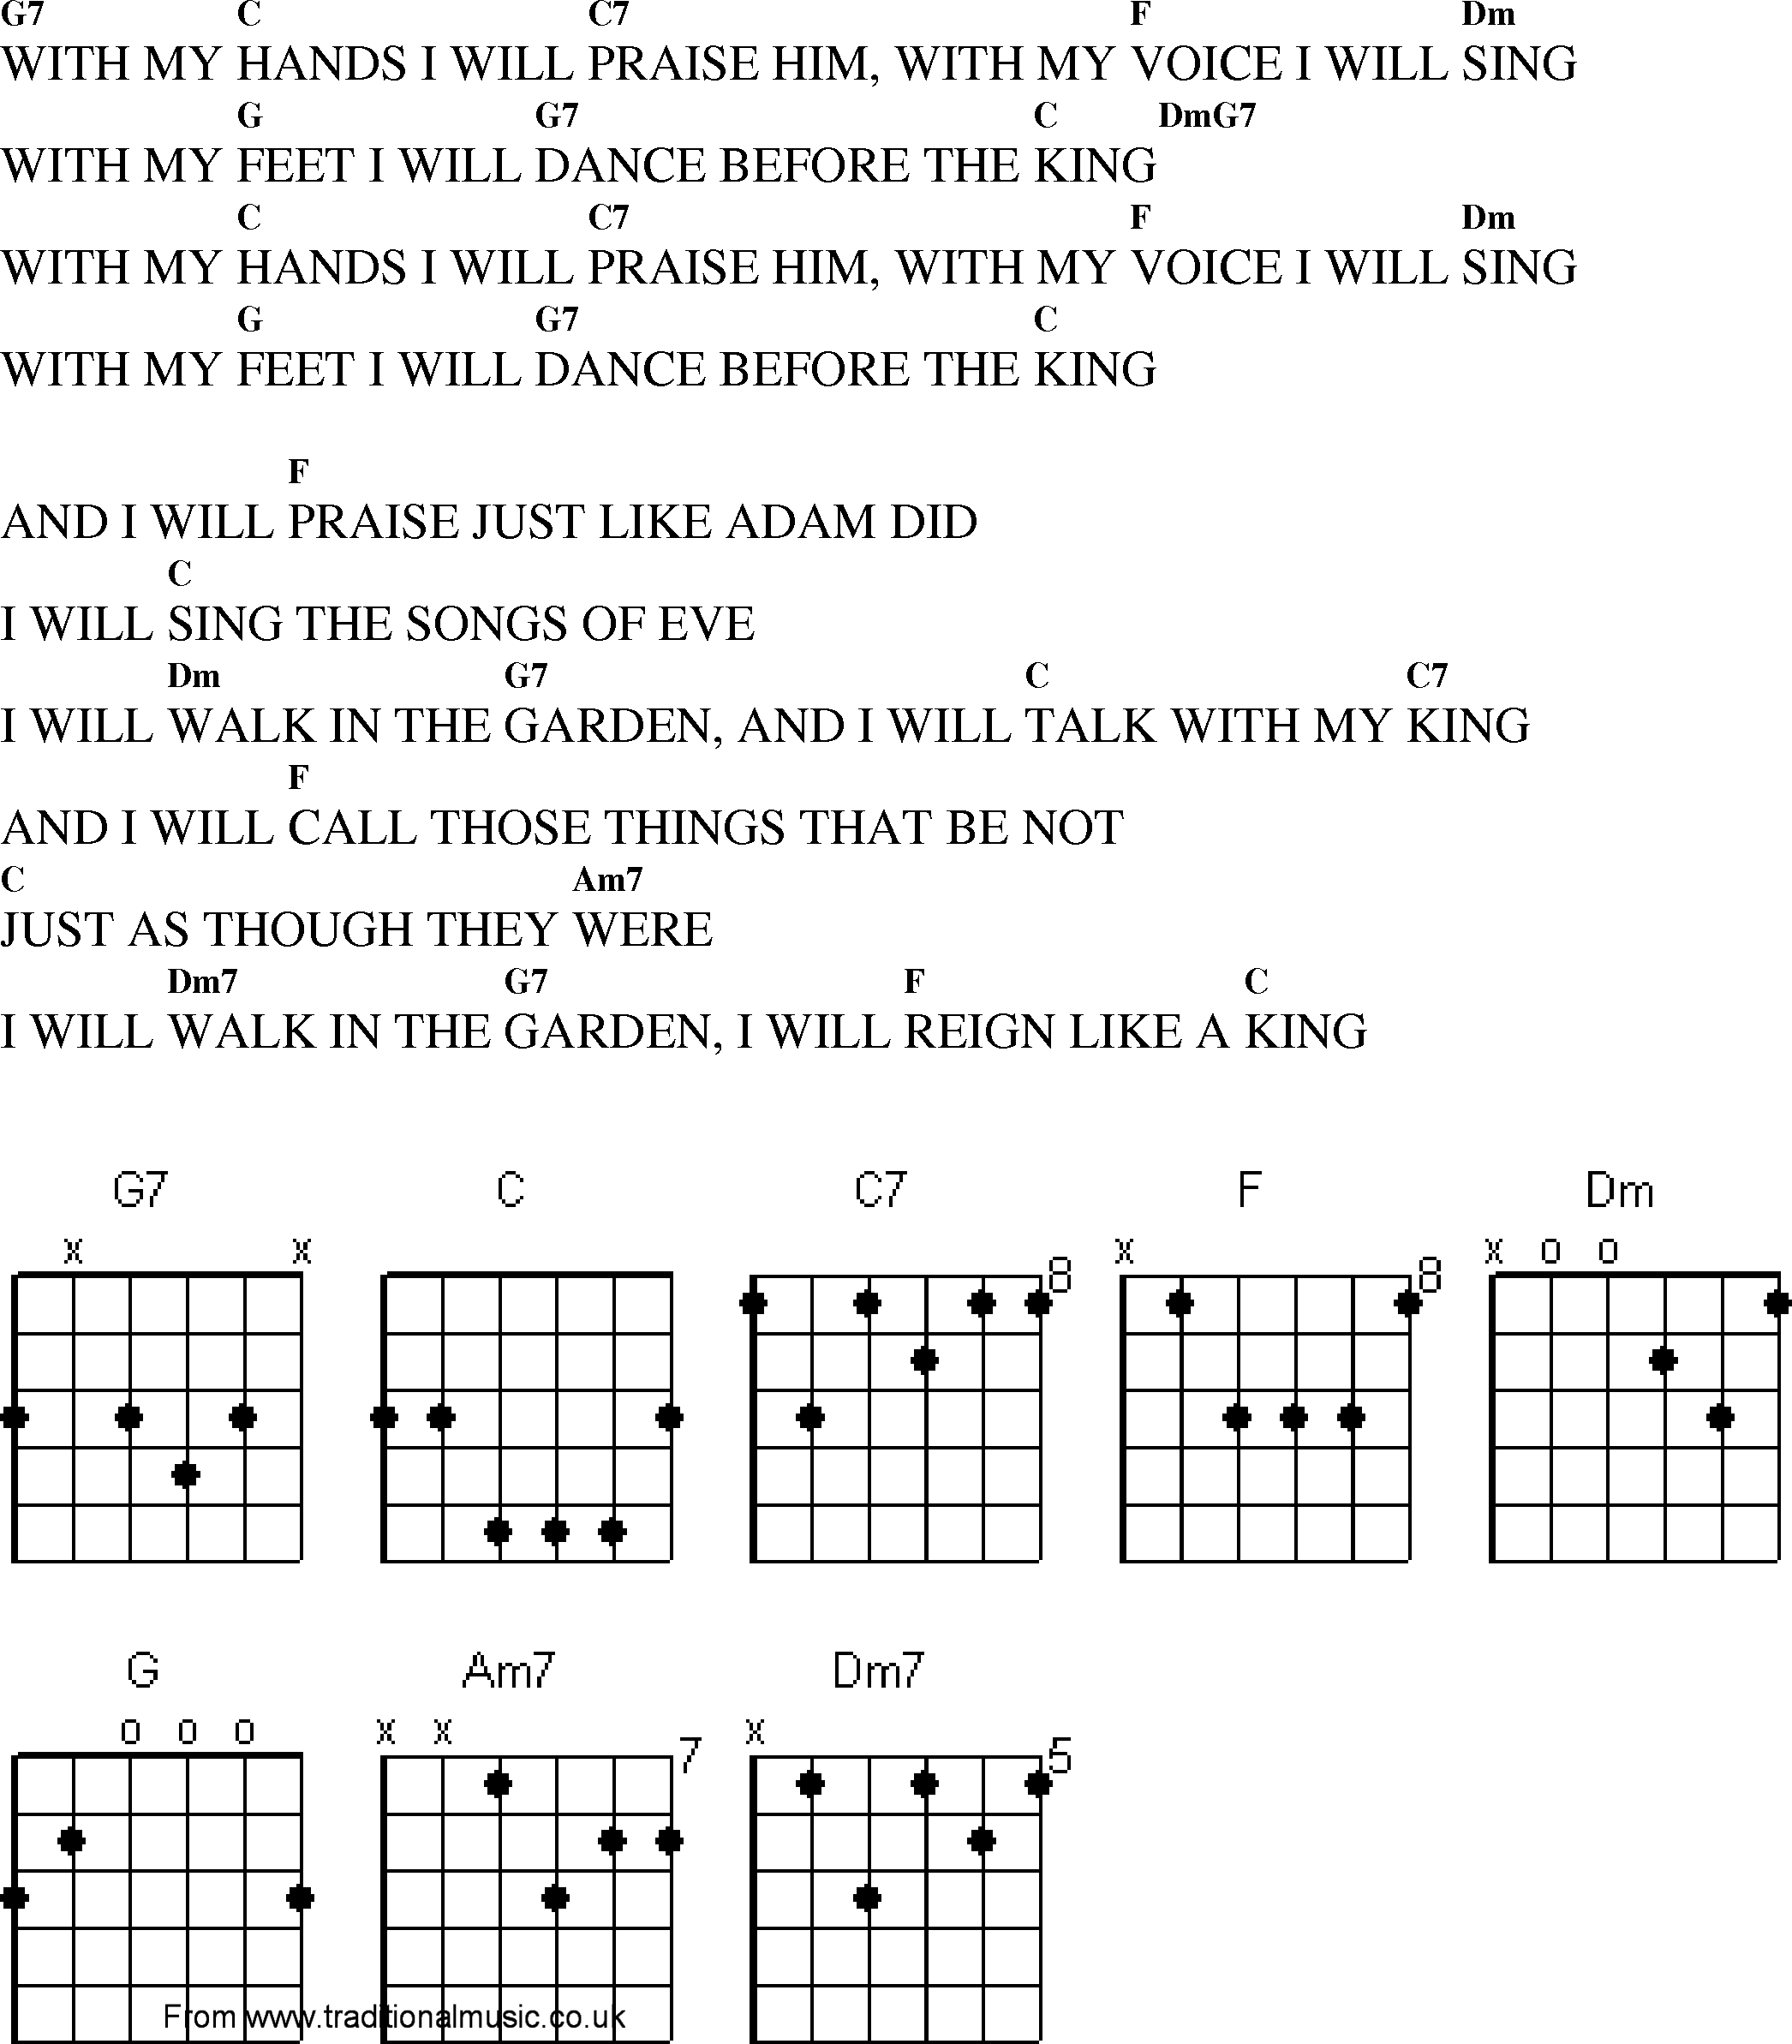 Gospel Song: with_my_hns_i_will_prise_him, lyrics and chords.